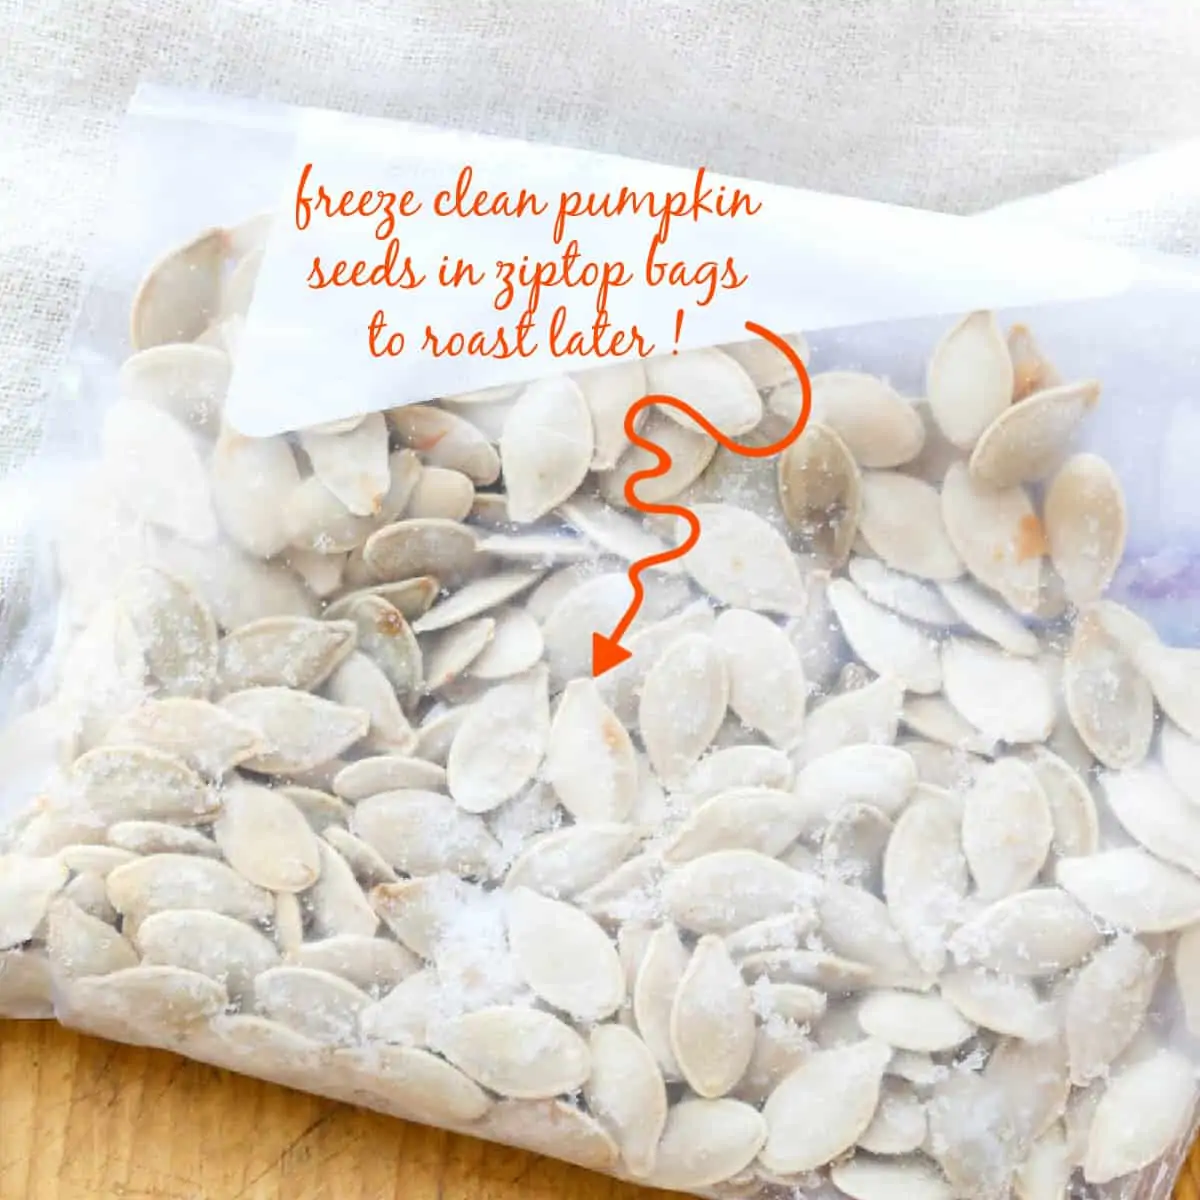 A zip-top bag filled with clean pumpkin seeds to use later in a roast pumpkin seed recipe.